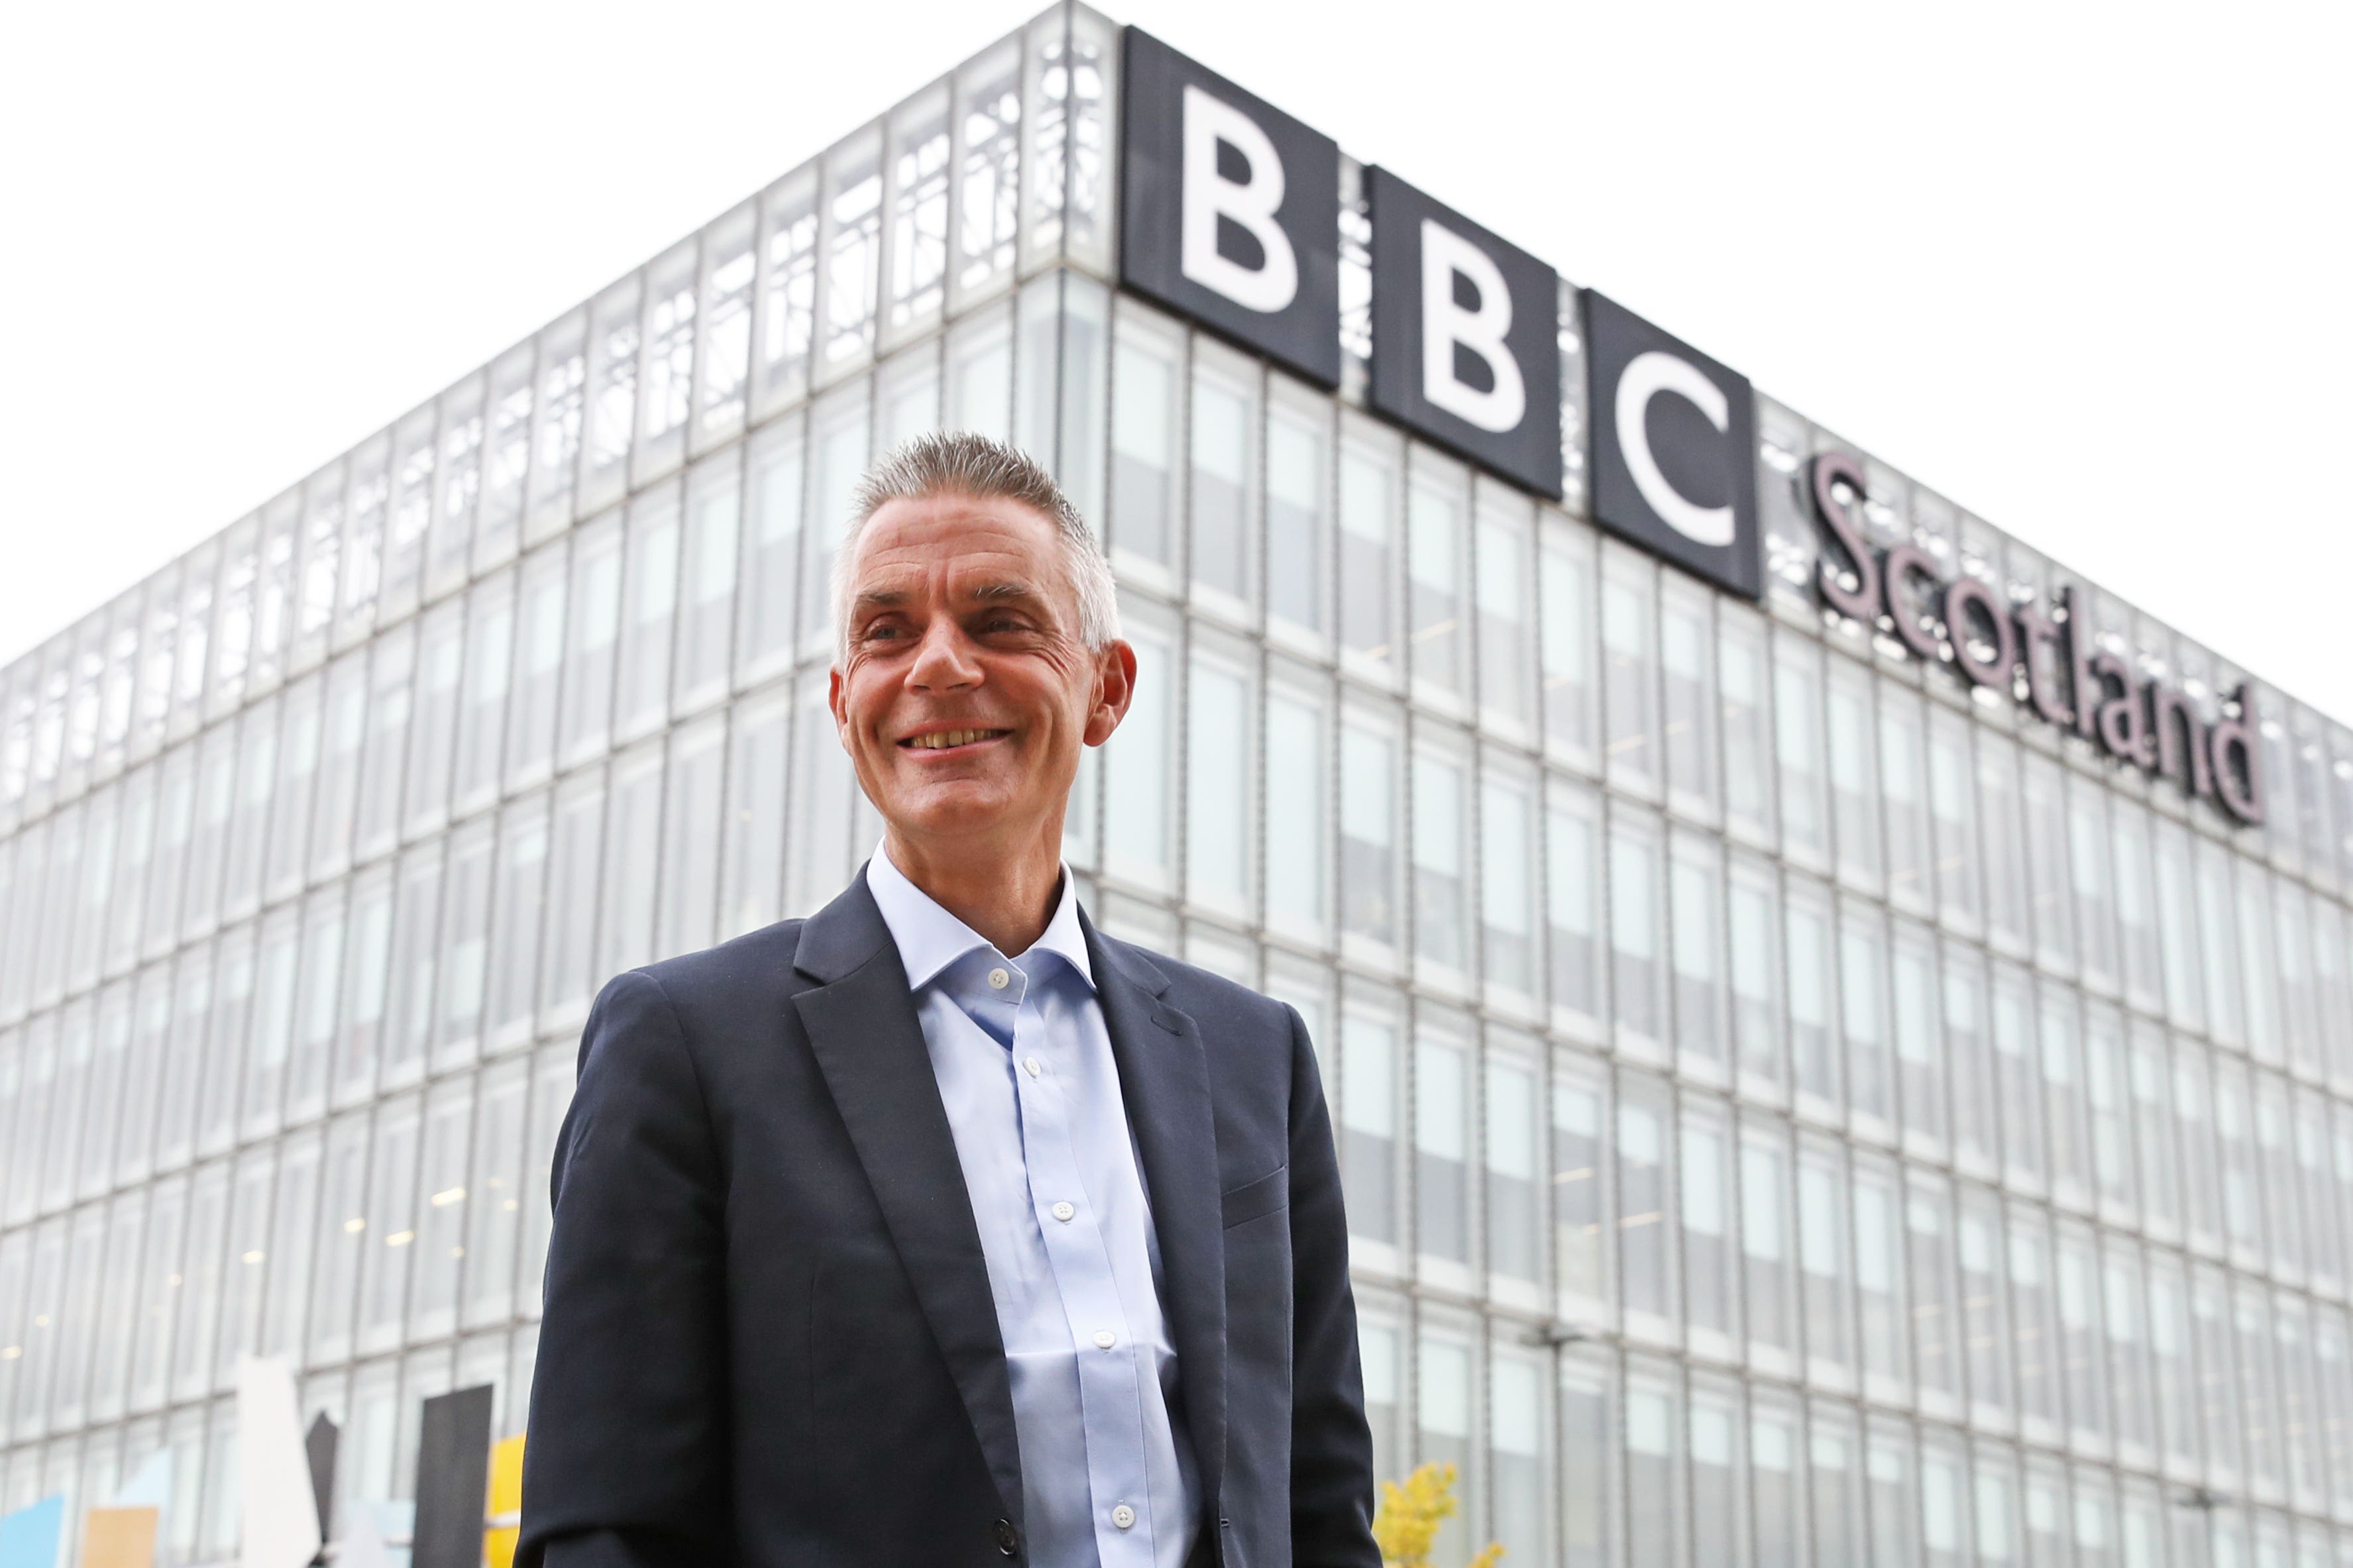 Tim Davie, Director General of the BBC, held emergency talks on Sunday with the Culture Secretary